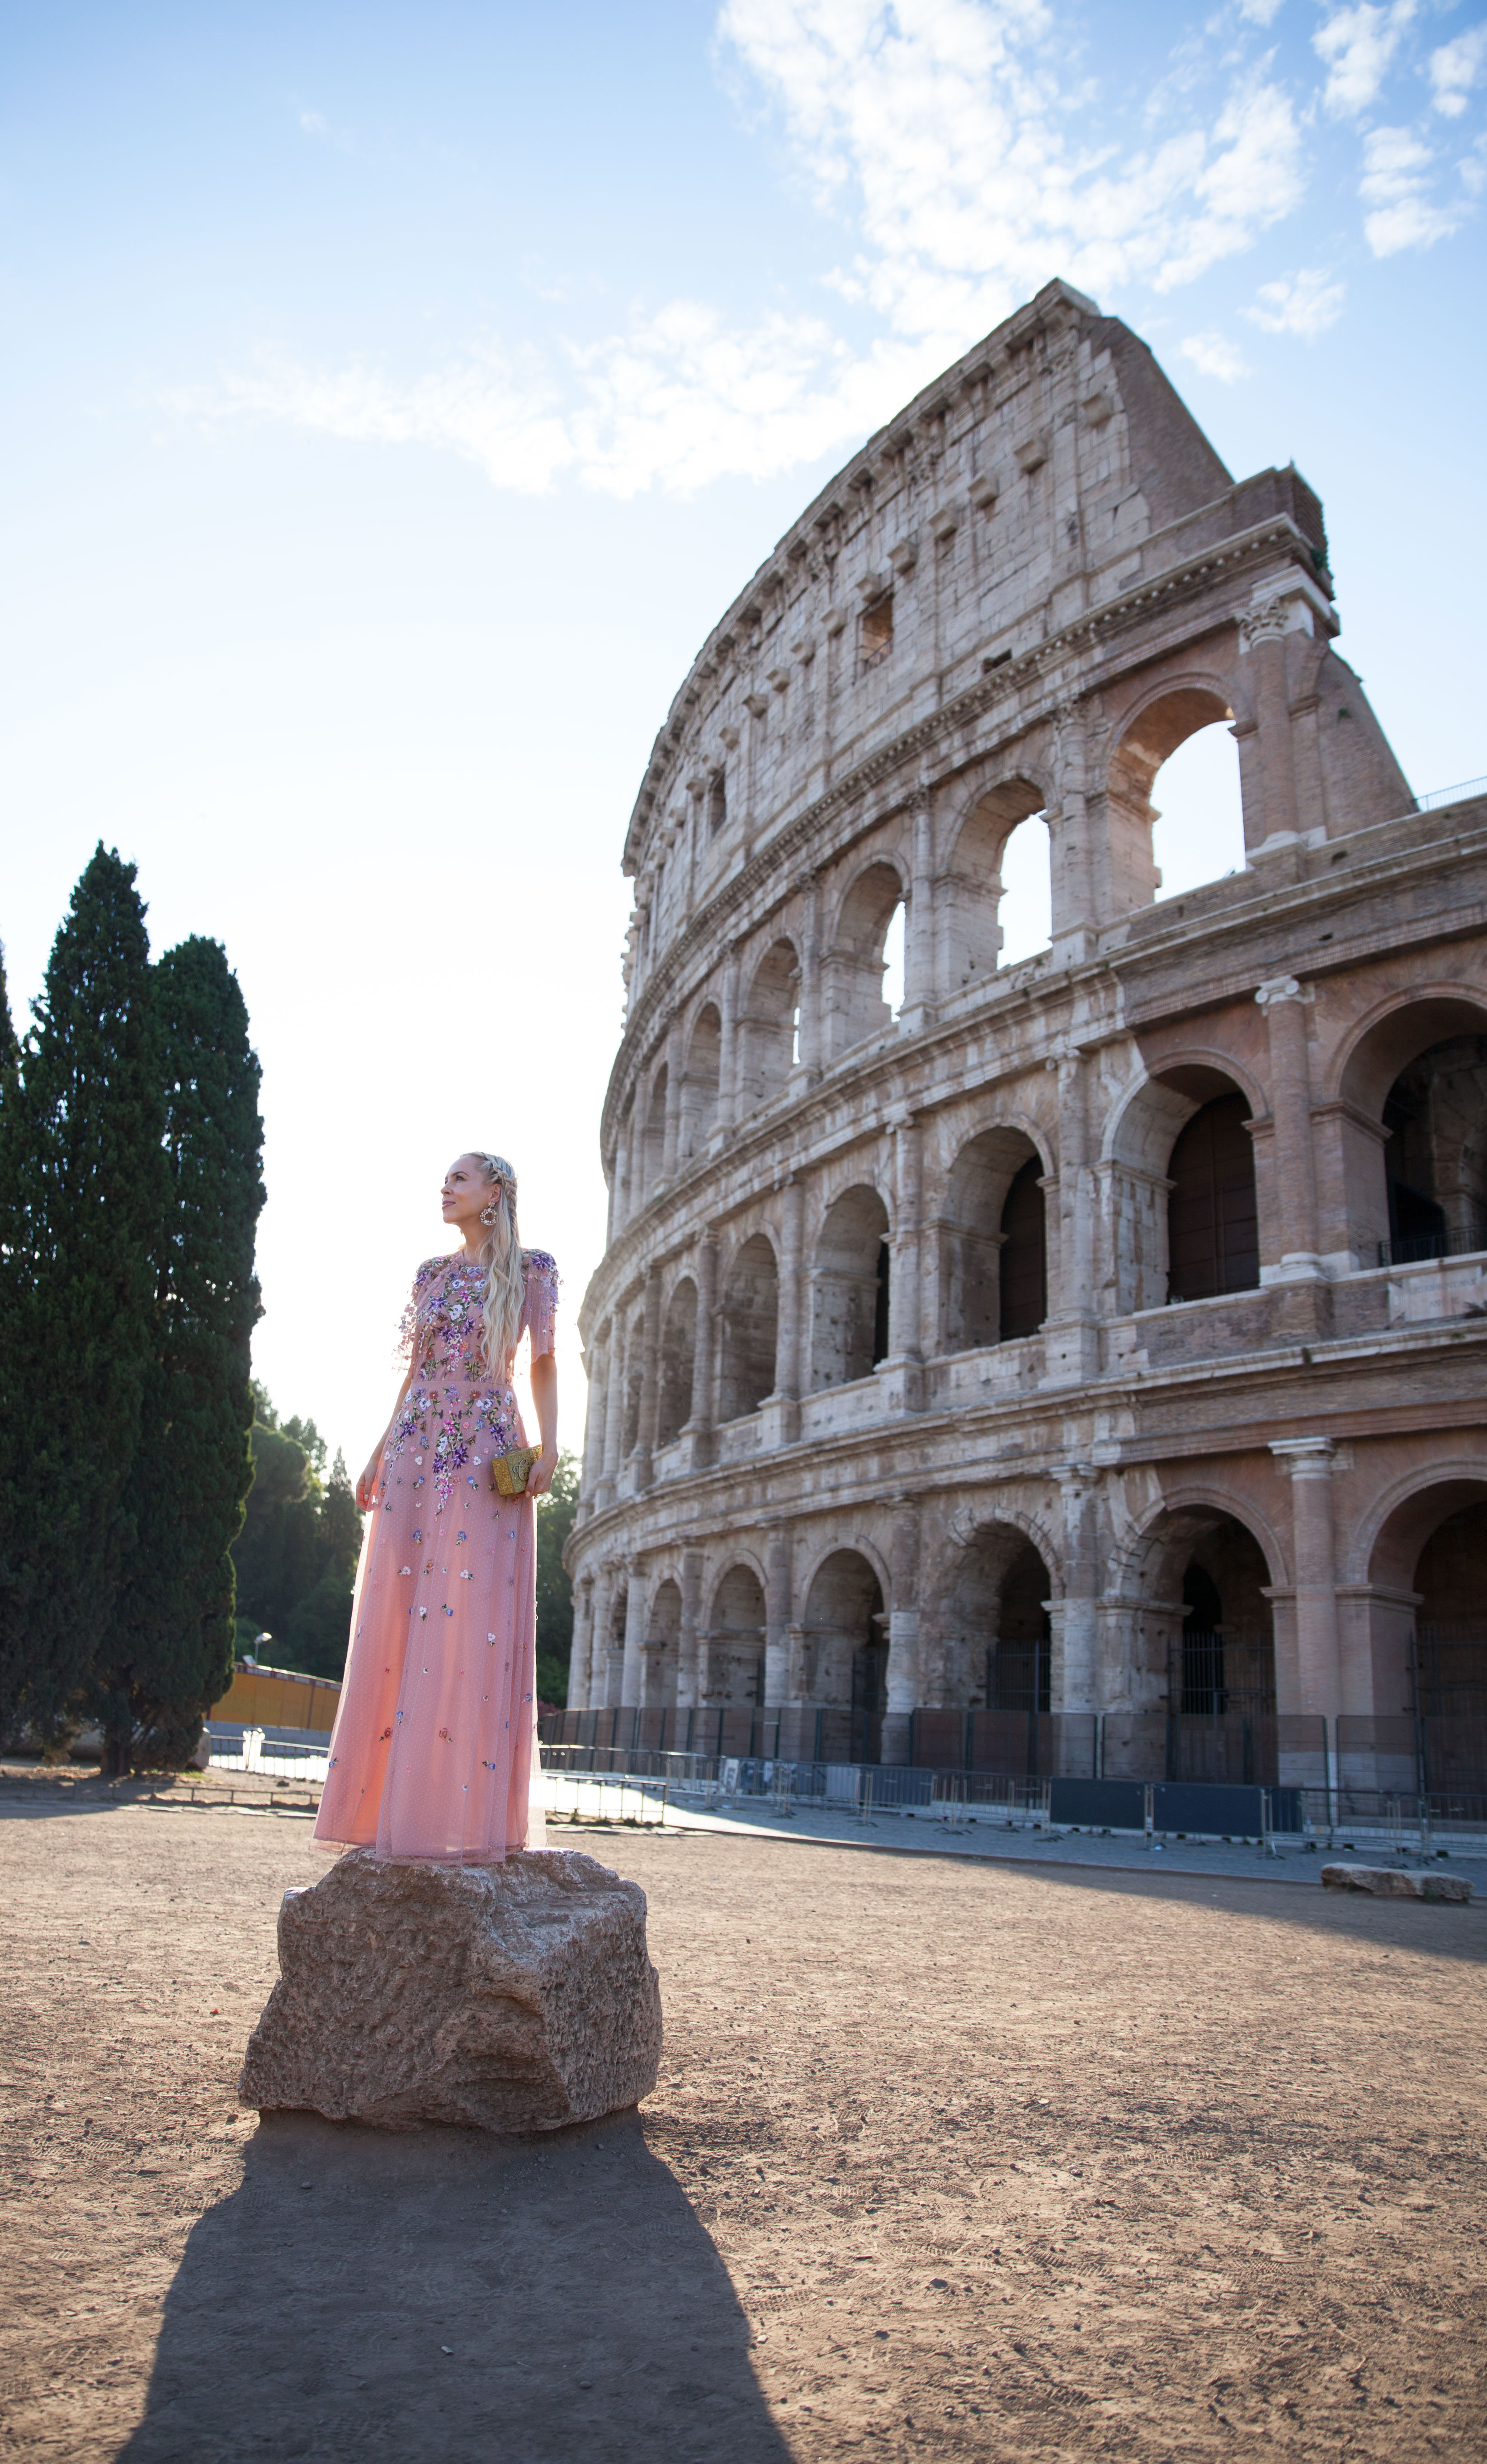 ASOS DESIGN Bridesmaid floral embroidered dobby mesh flutter sleeve maxi dress in Rome  | ASOS floral embroidered maxi dress featured by top San Francisco fashion blog, Lombard and Fifth: image of a blonde woman wearing a floral maxi dress at the Colosseum in Rome